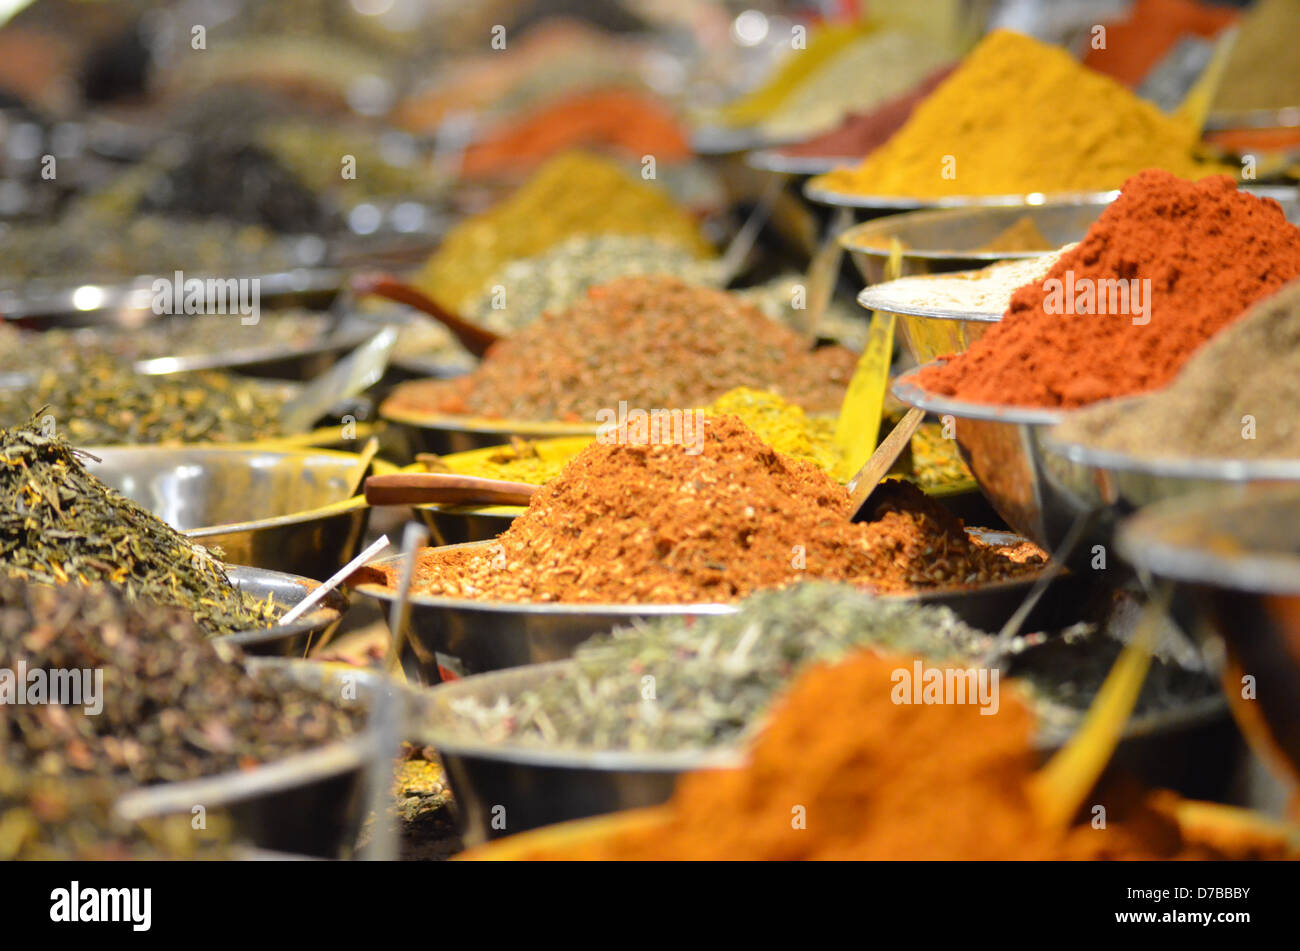 Variety Is The Spice Of Life Stock Photo Alamy